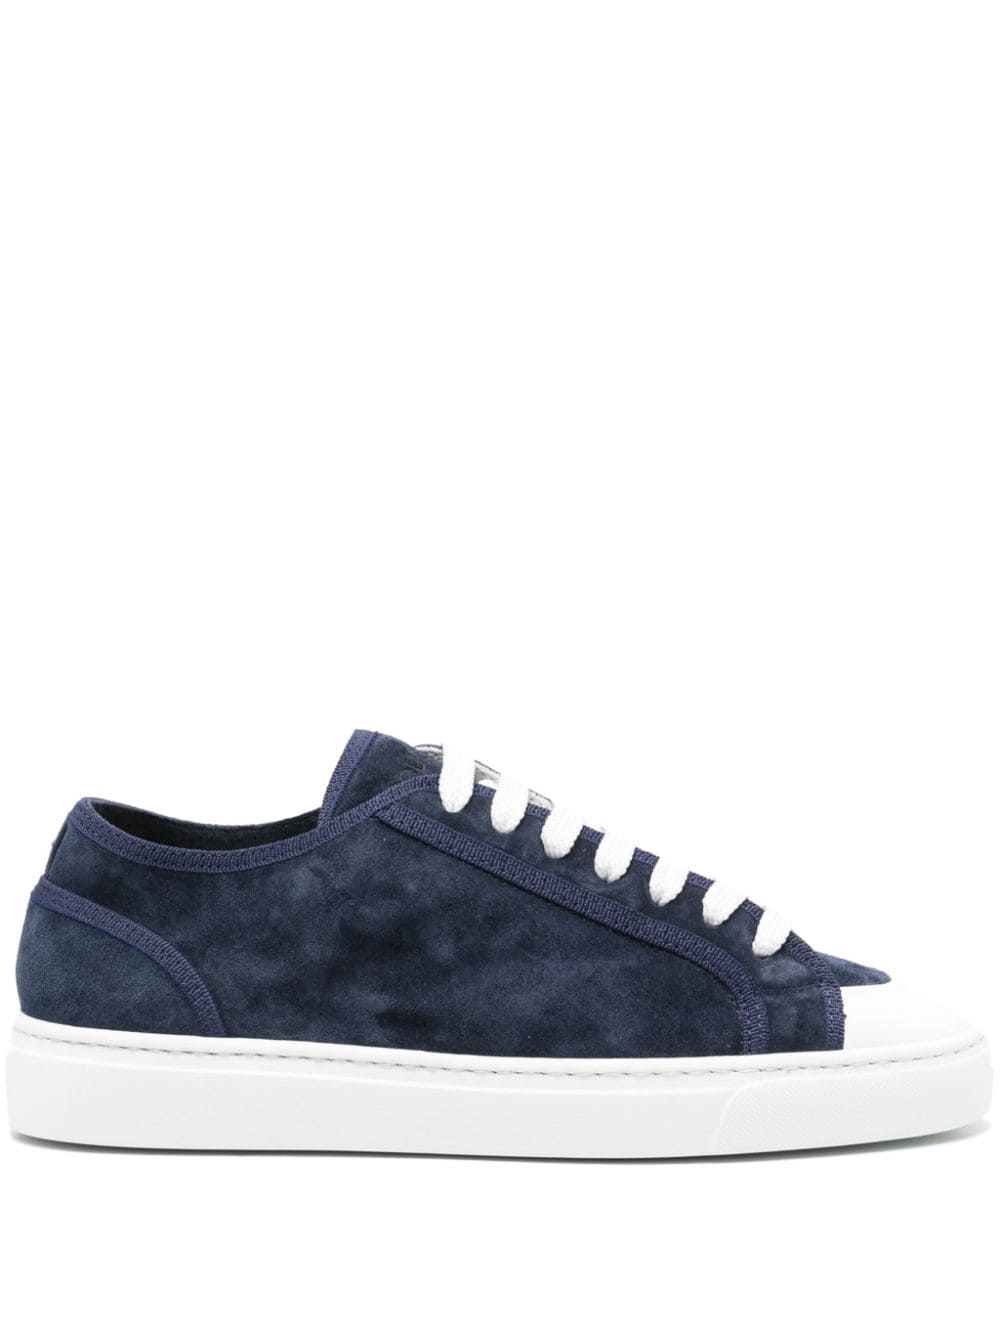 Doucal's suede lace-up sneakers - Blue von Doucal's